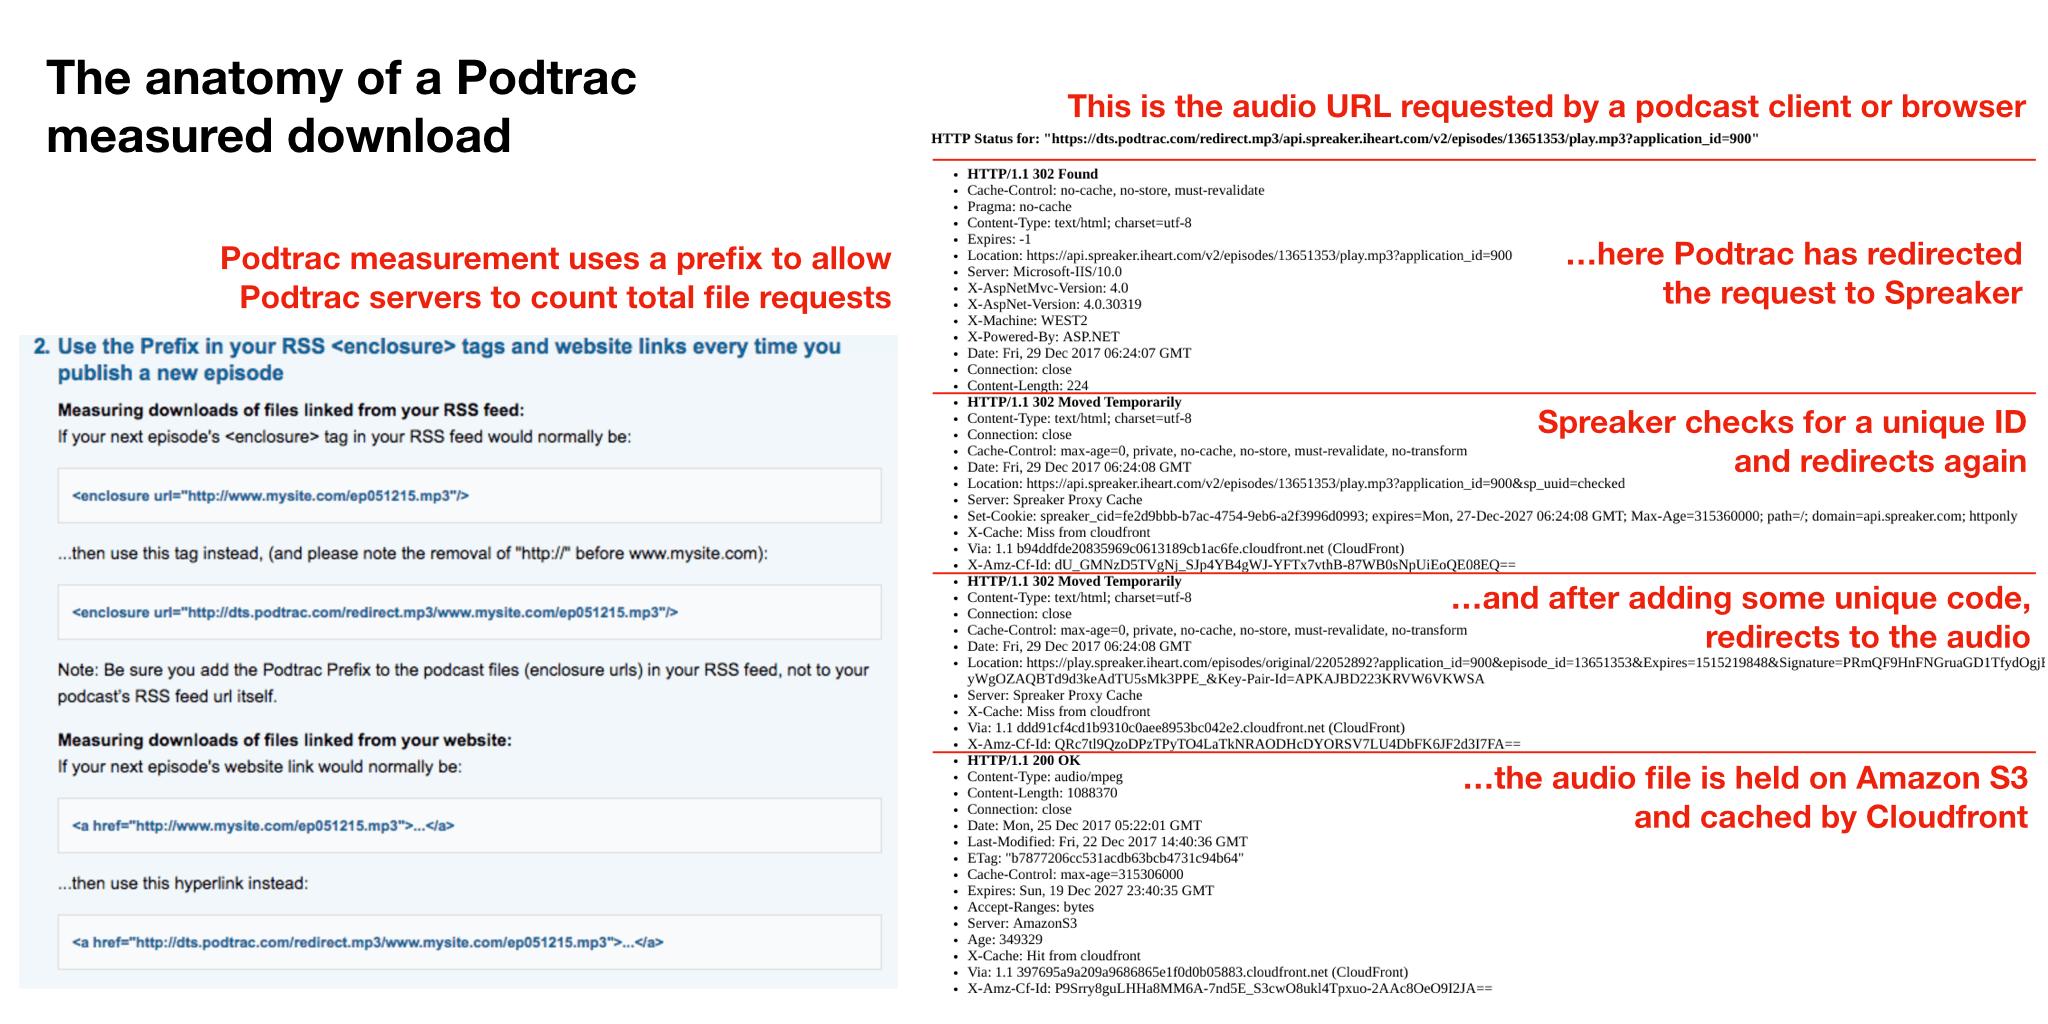 The anatomy of a Podtrac request